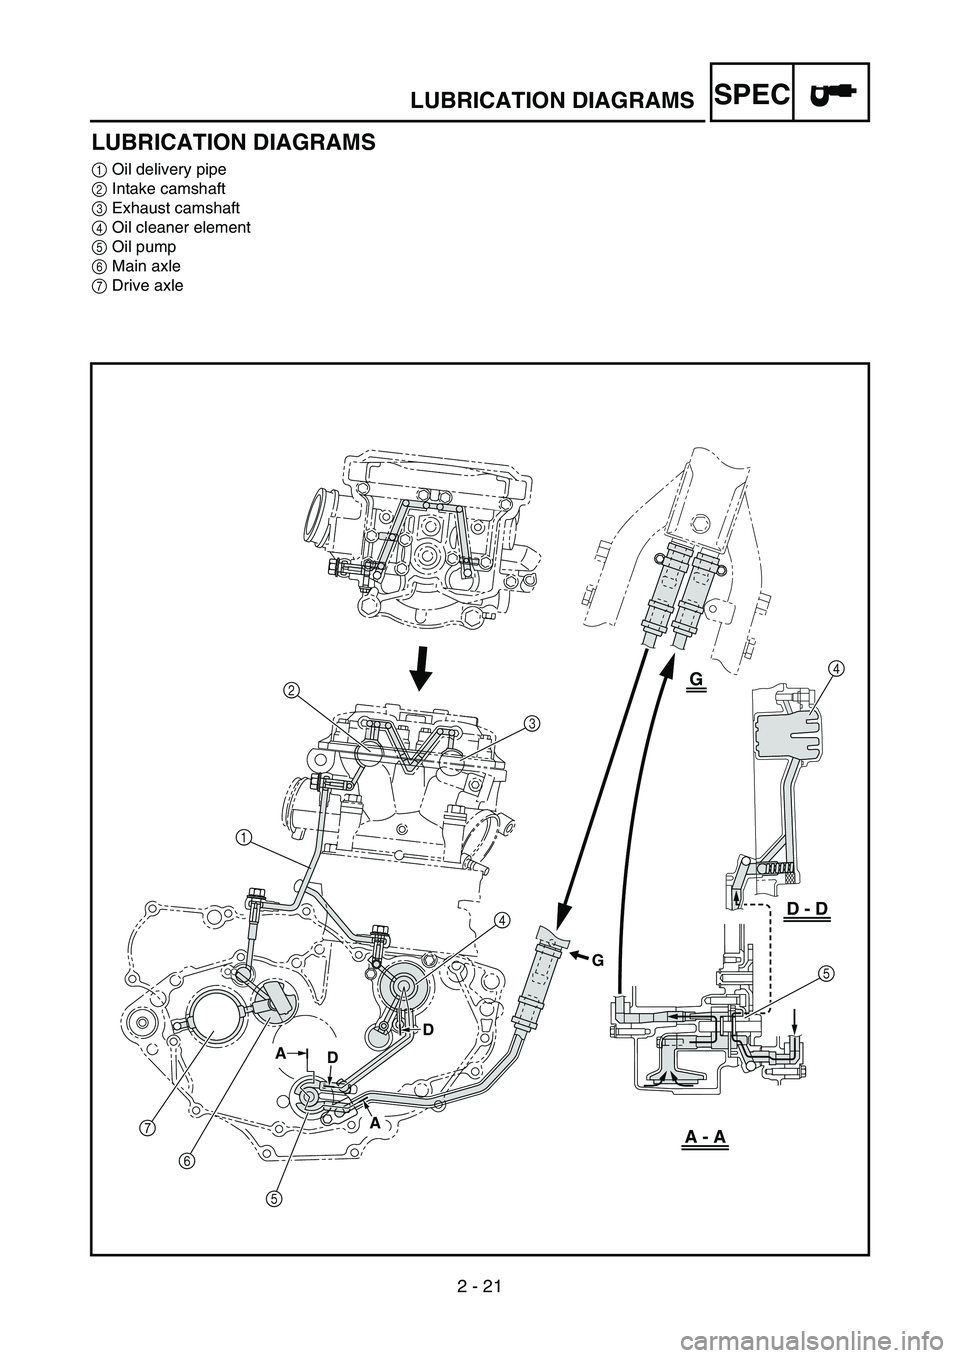 YAMAHA WR 450F 2006  Notices Demploi (in French) 2 - 21
SPECLUBRICATION DIAGRAMS
LUBRICATION DIAGRAMS
1Oil delivery pipe
2Intake camshaft
3Exhaust camshaft
4Oil cleaner element
5Oil pump
6Main axle
7Drive axle
7
6
543 24
5
A - A
D - D
G
G
D
D A
A
1 